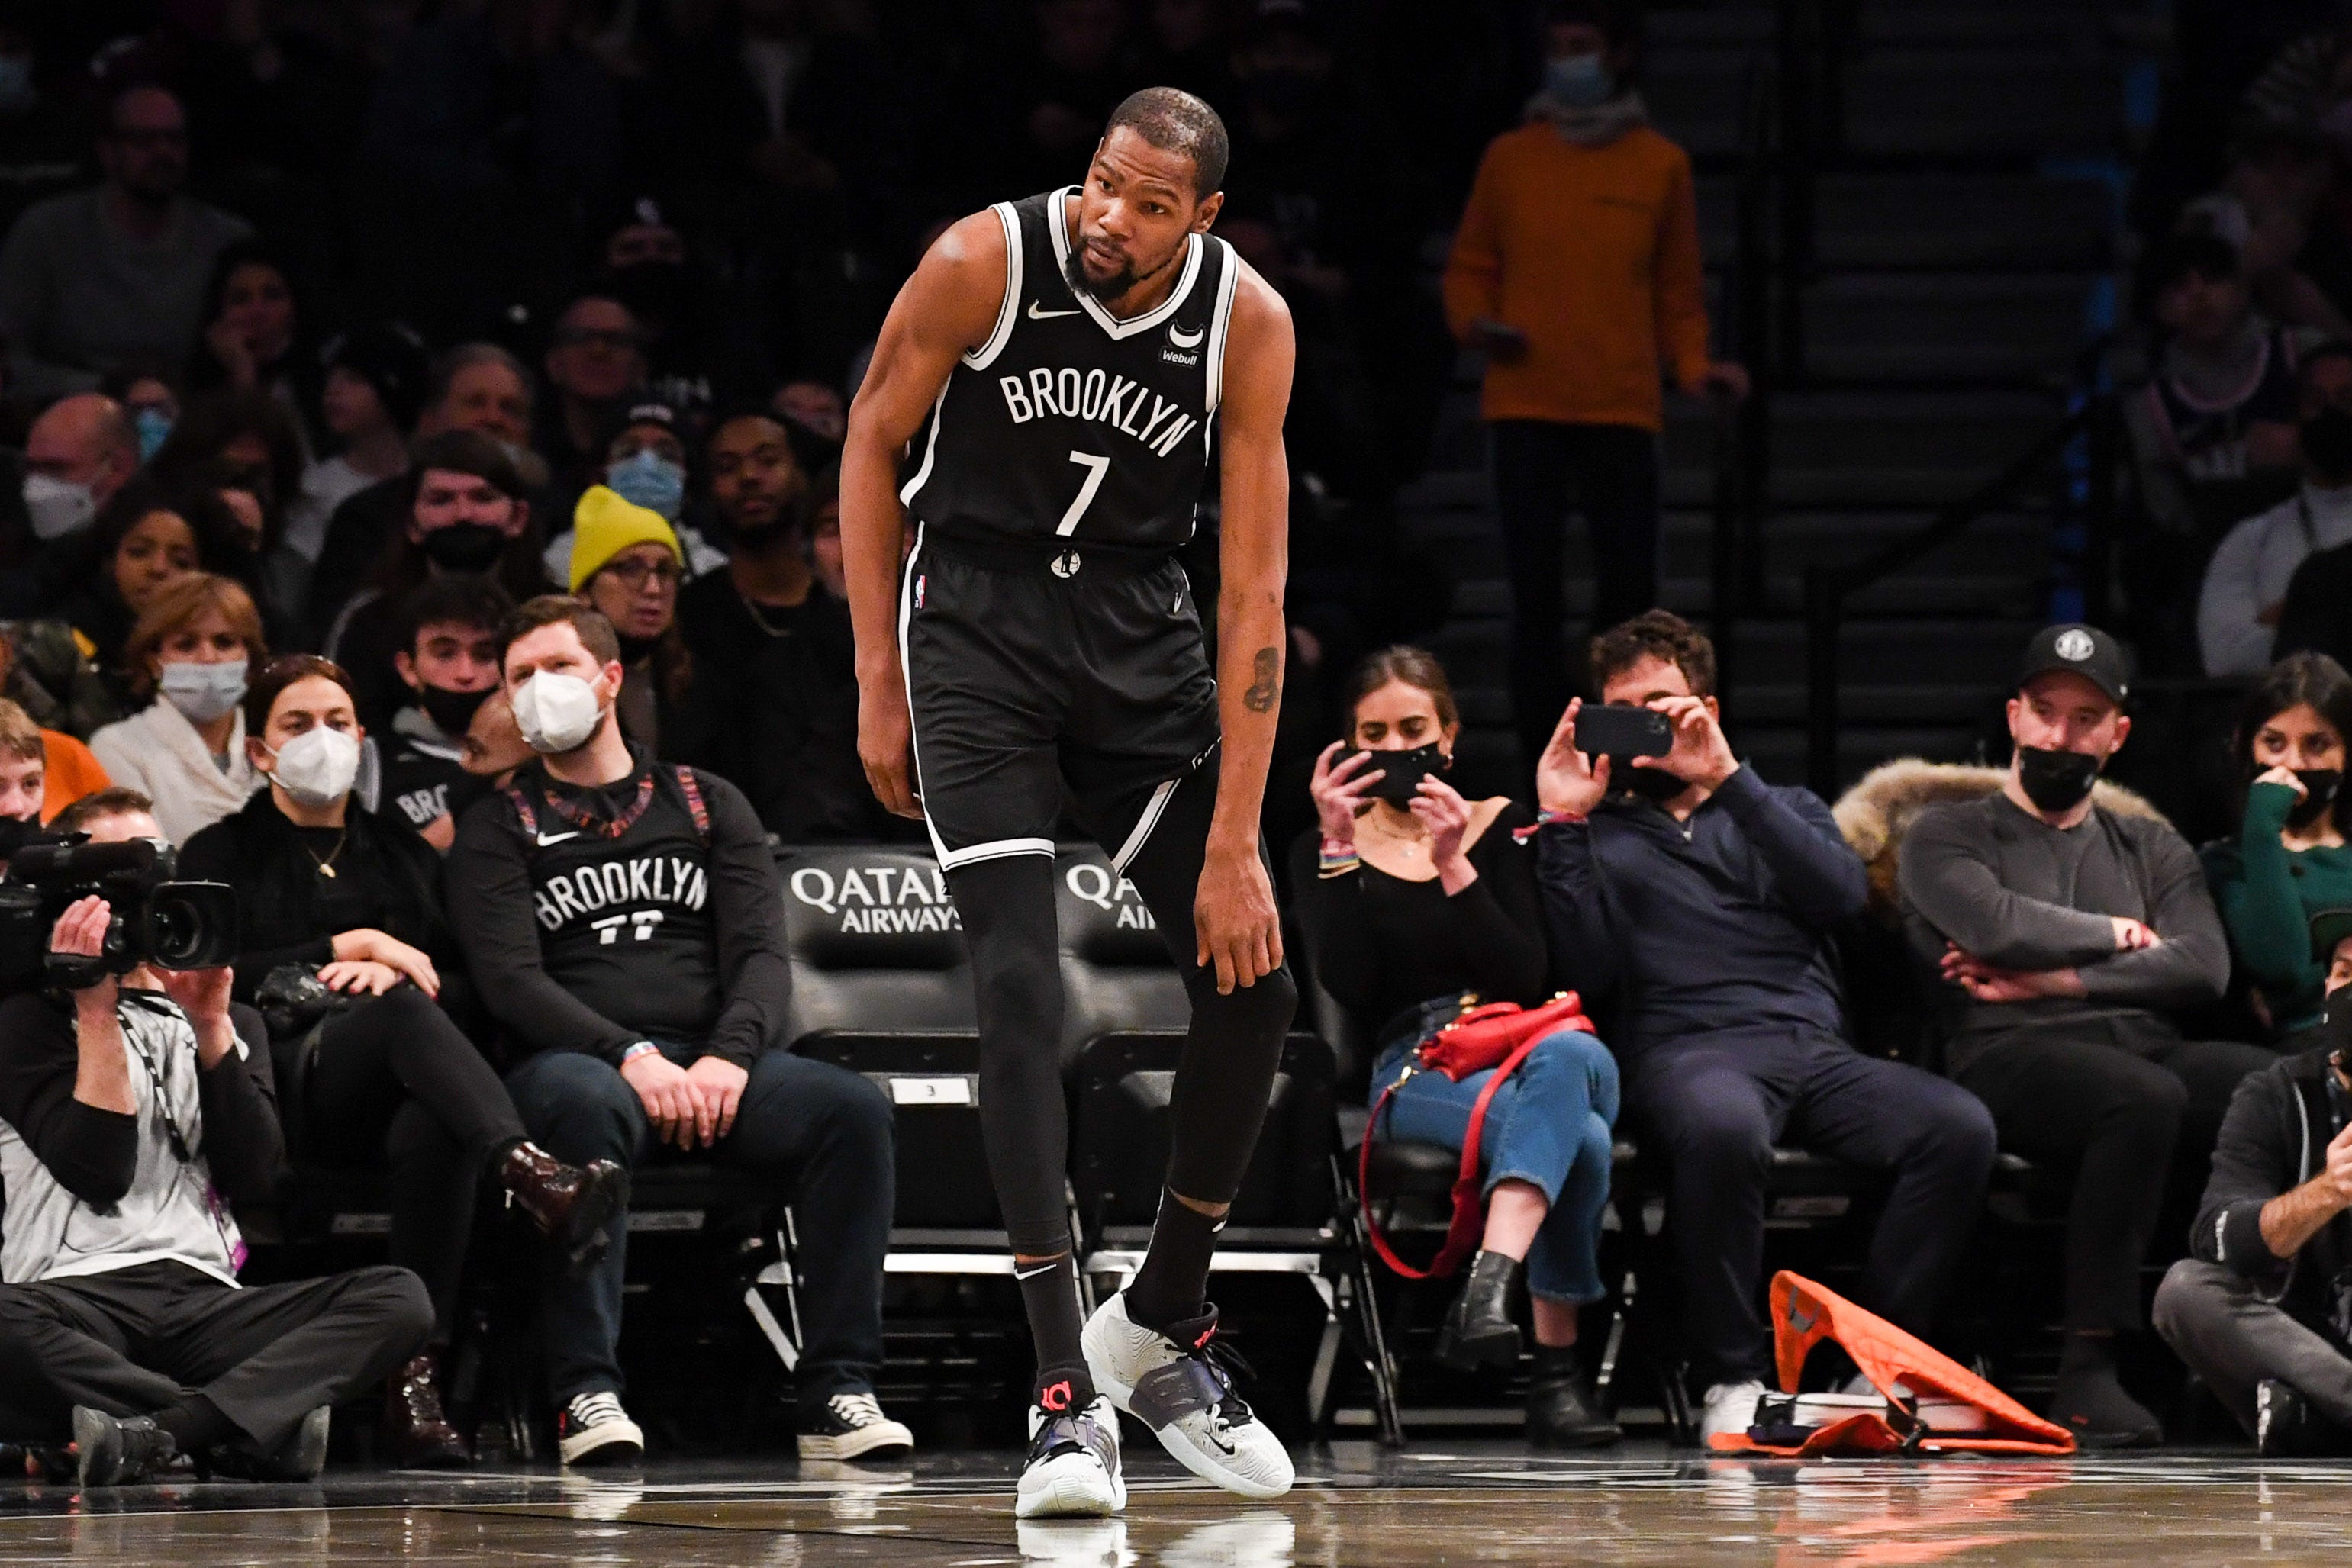 Brooklyn Nets star Kevin Durant sidelined with sprained knee